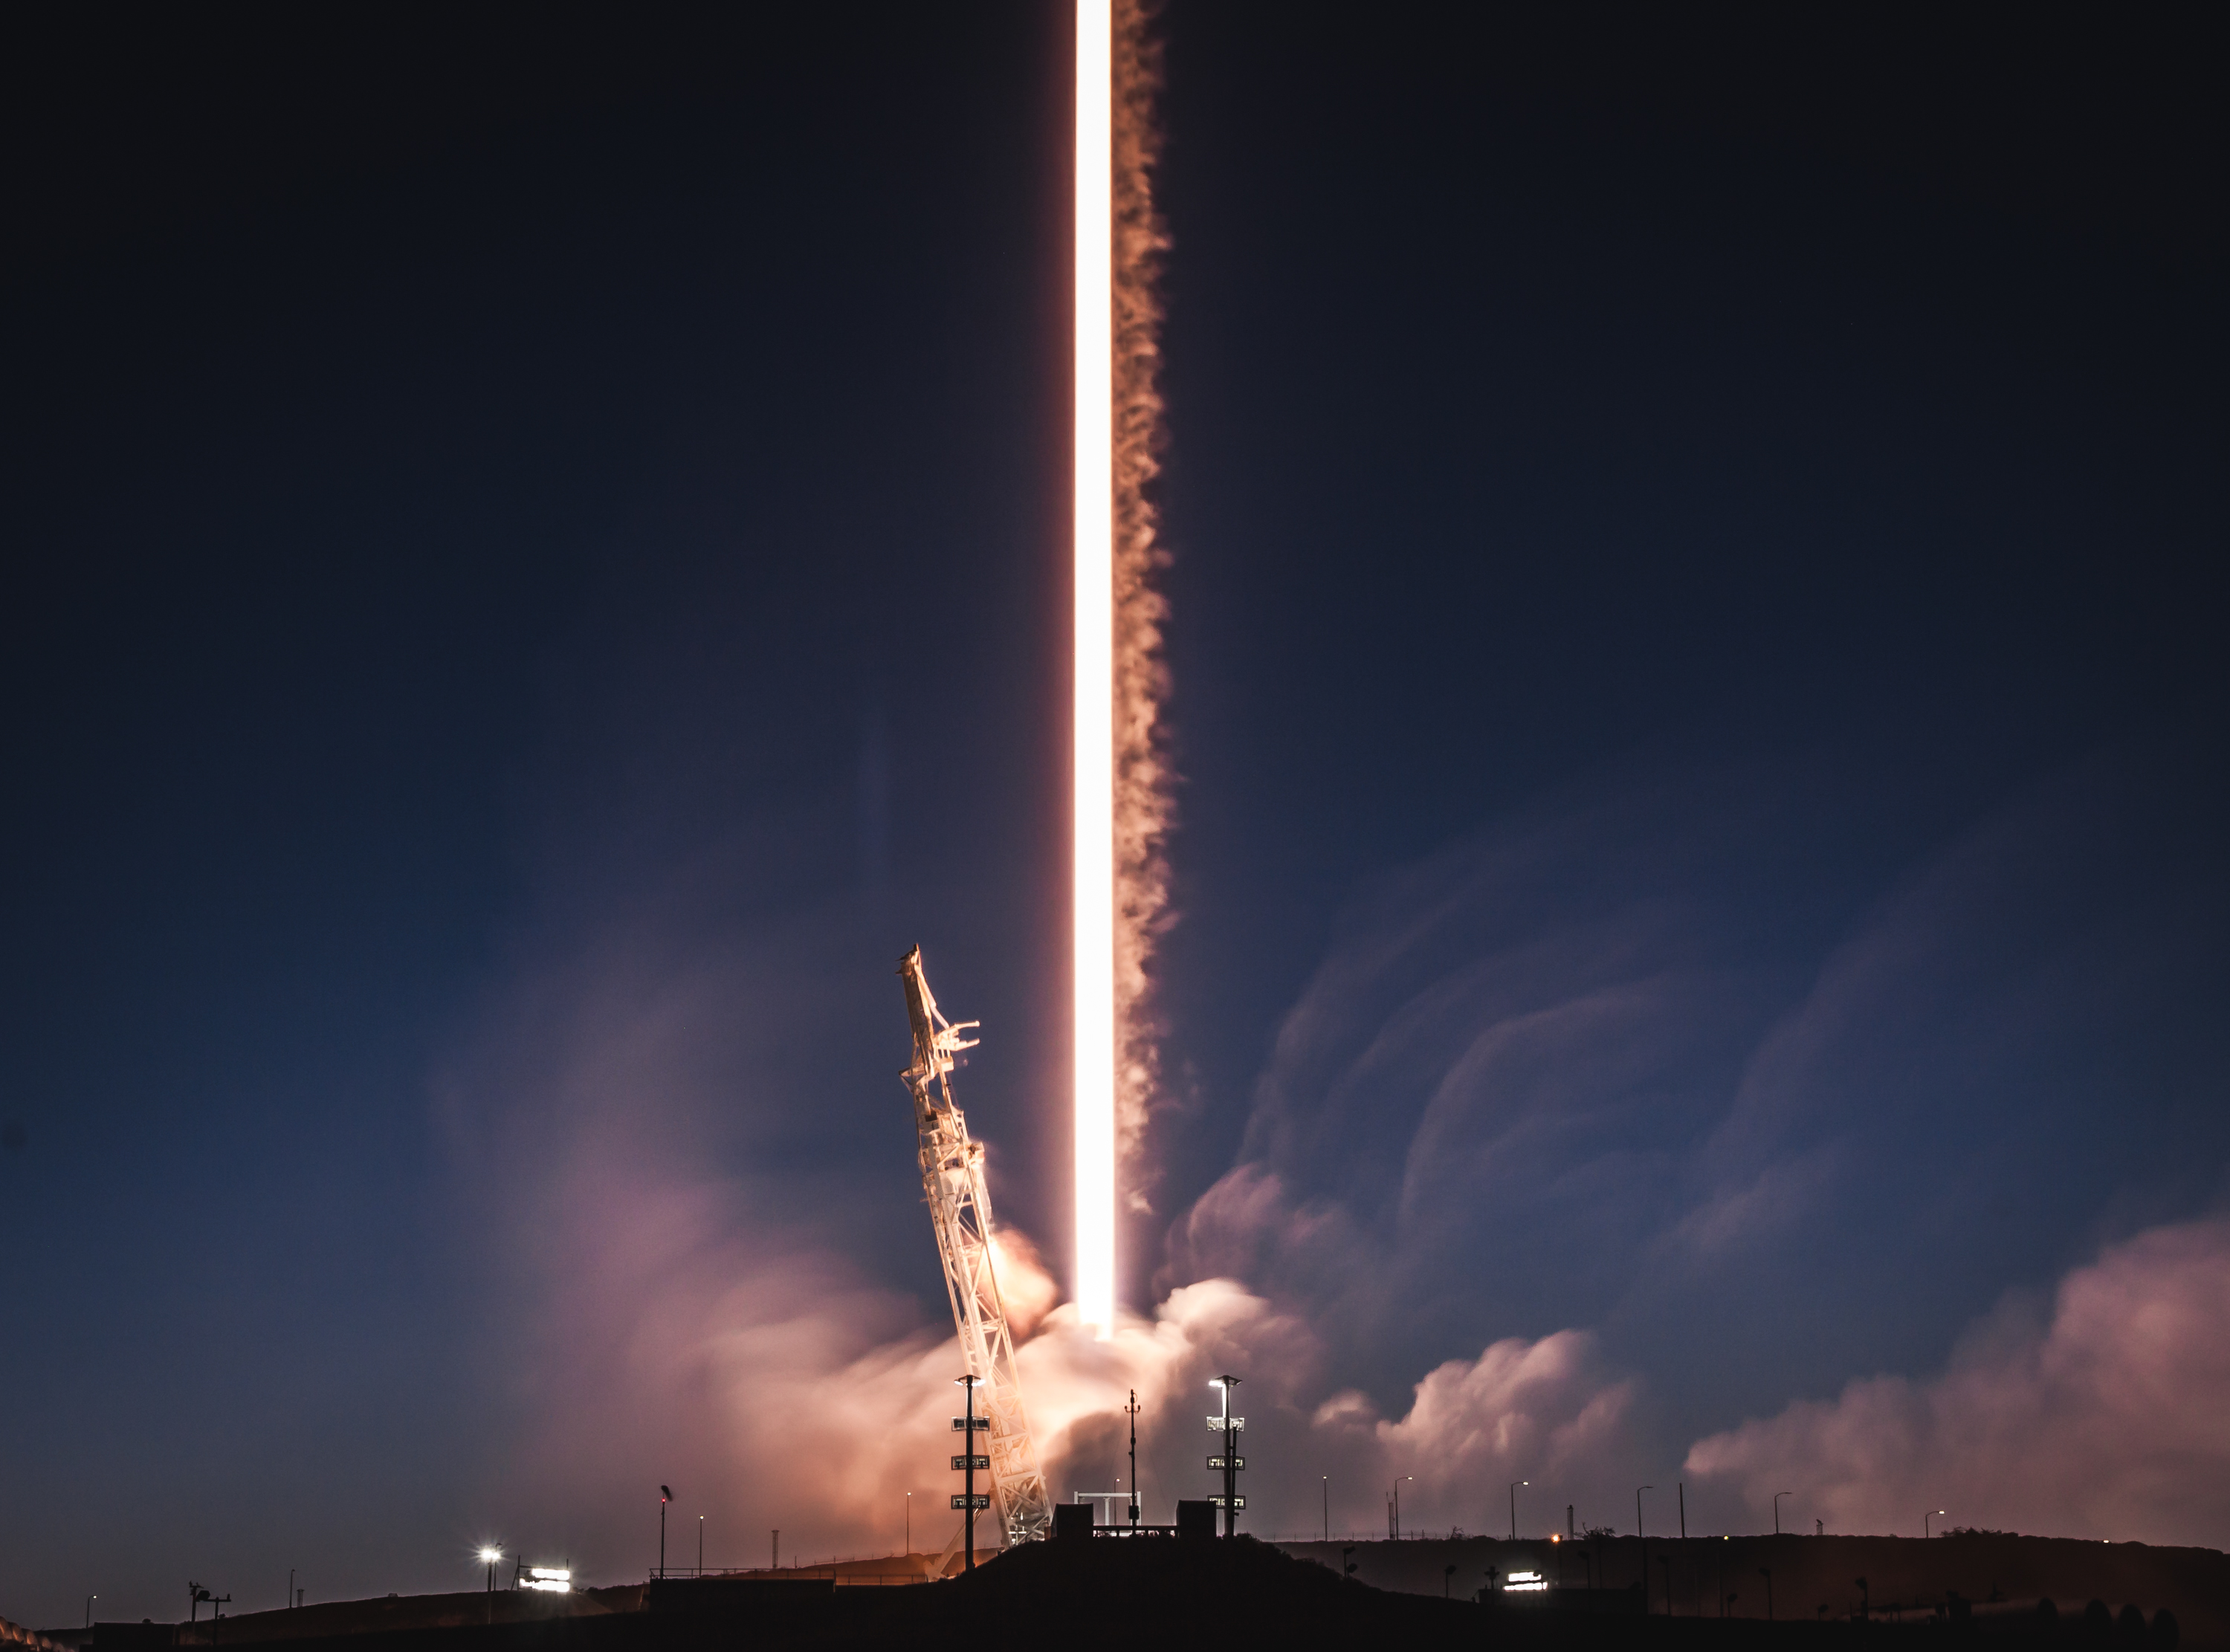 spacex, technology, falcon 9, lift off, rocket